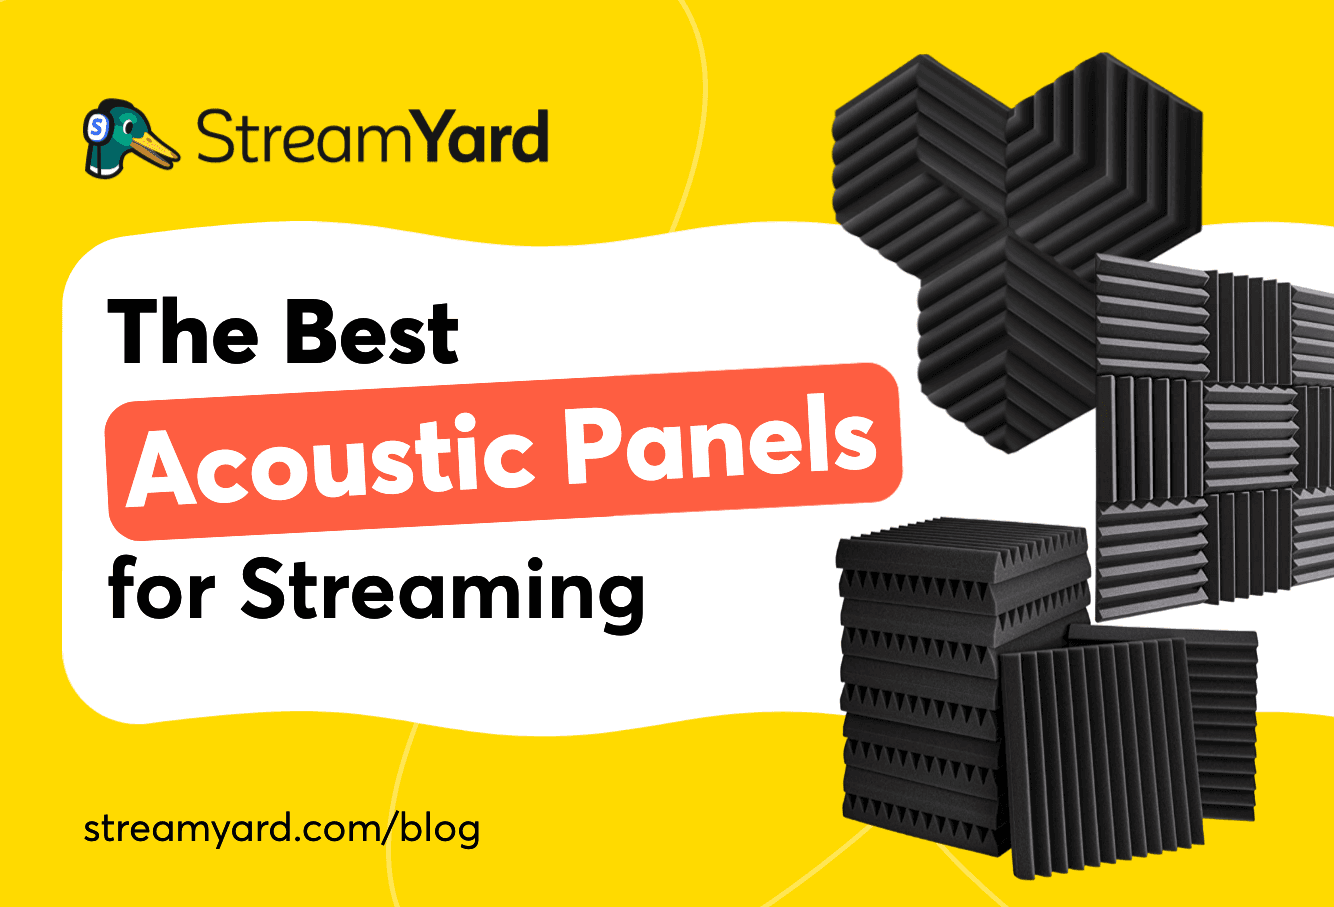 If you are a live streamer wanting to enhance the audio quality of your broadcasts, then try one of the best acoustic panels to improve your sound.